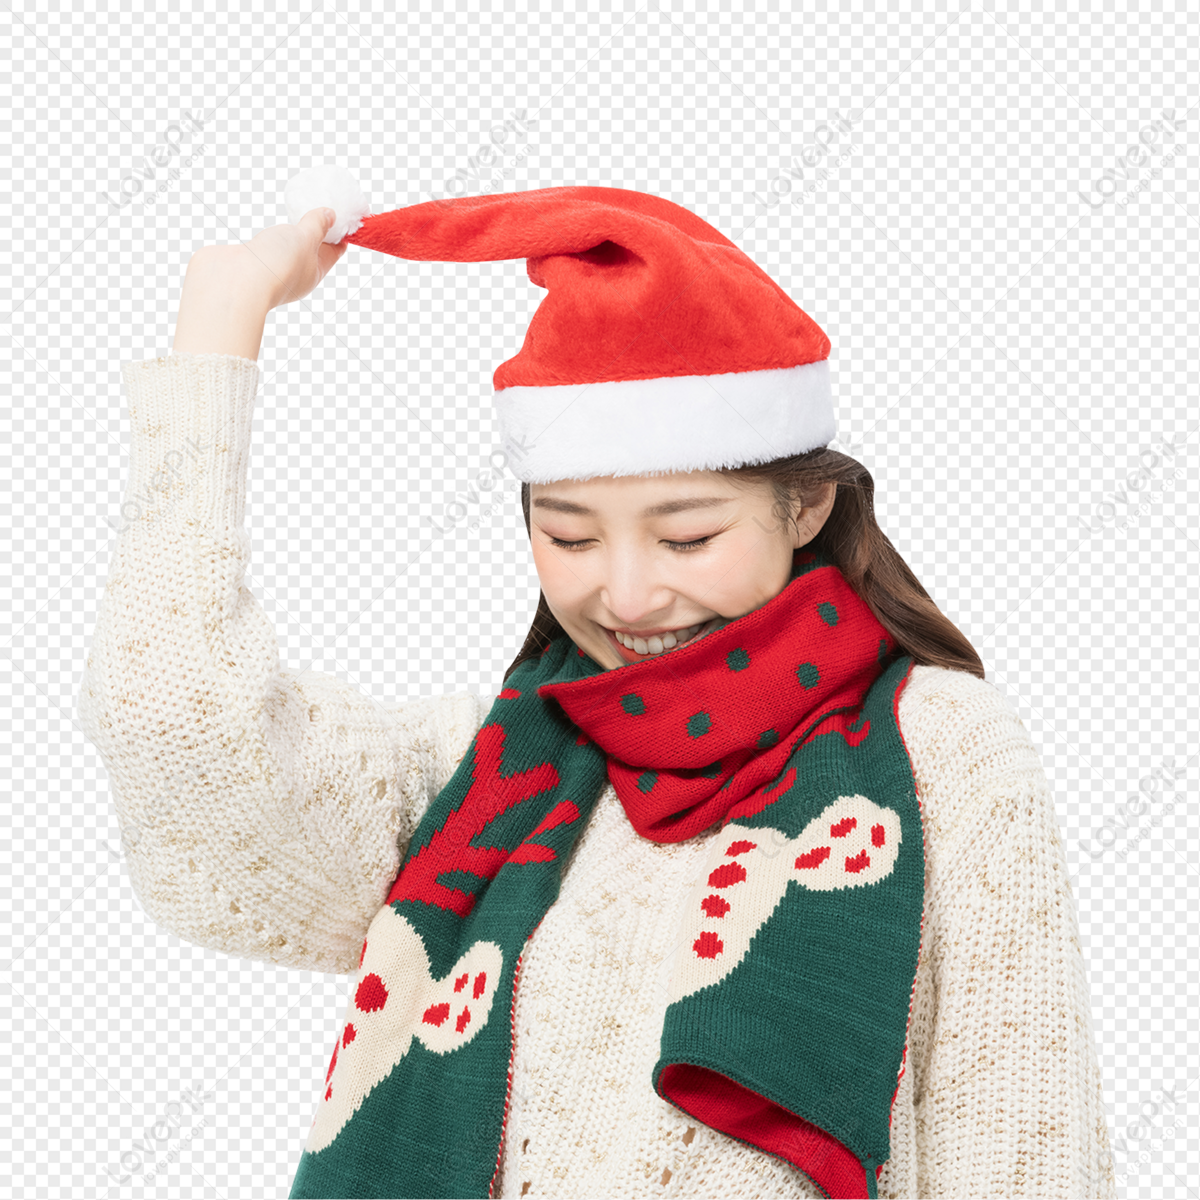 Winter Dress png images